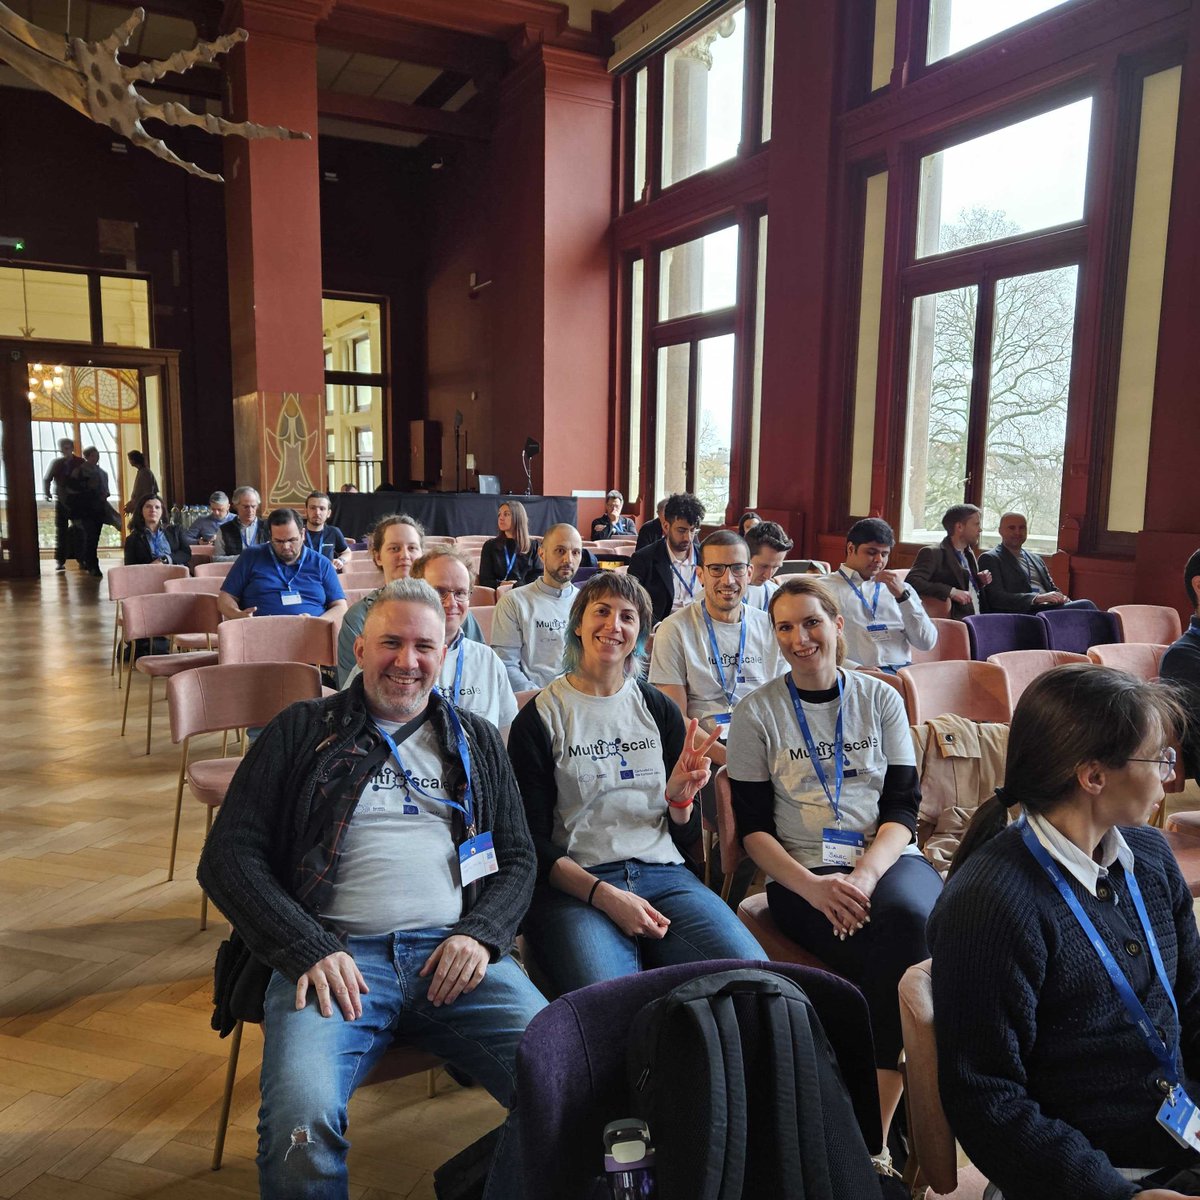 👥👥 Our #MultiXscale team was thrilled to participate in the #EuroHPCsummit2024 📌 located in a very special place: @ARoomWithAZOO 🦍🐳🦋

Such a great event, thanks a lot to the organizers!!

Hope to meet you all in the next #EuroHPCsummit 👋

@EuroHPC_JU #HPC #ARoomWithAZOO